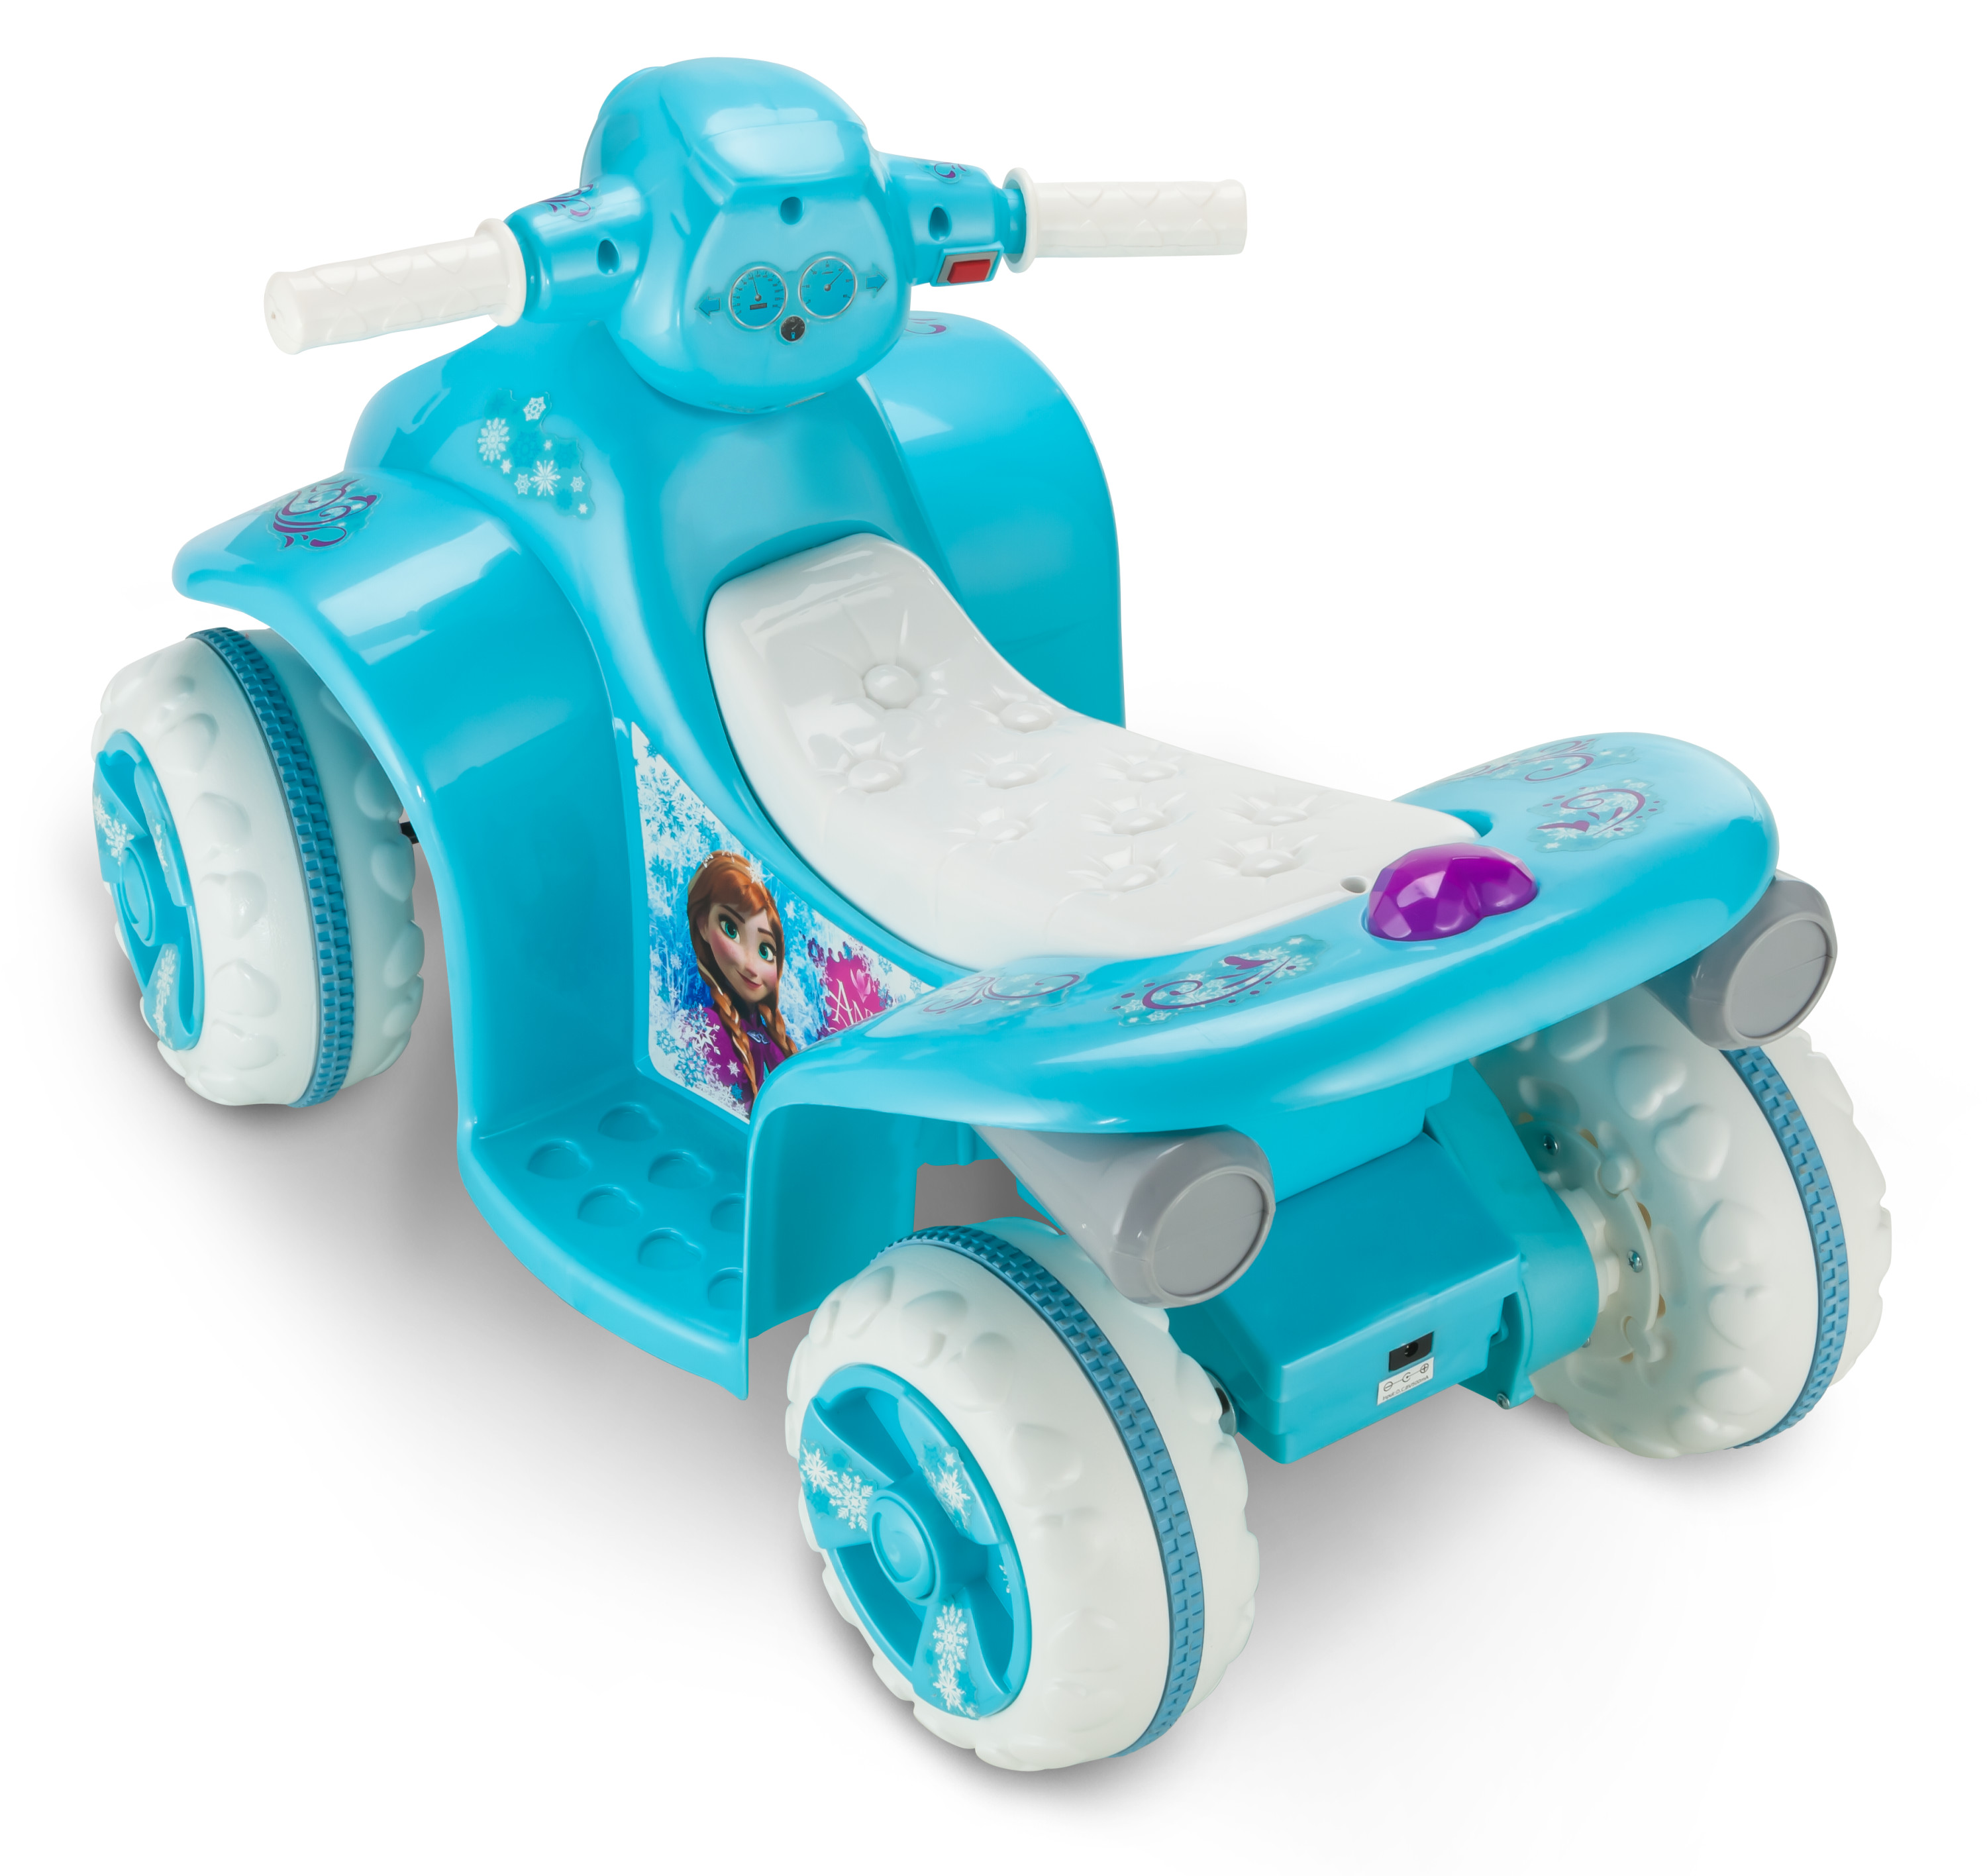 Disney's Frozen Toddler Ride-On Toy by Kid Trax (18- 30 Months) - image 4 of 4